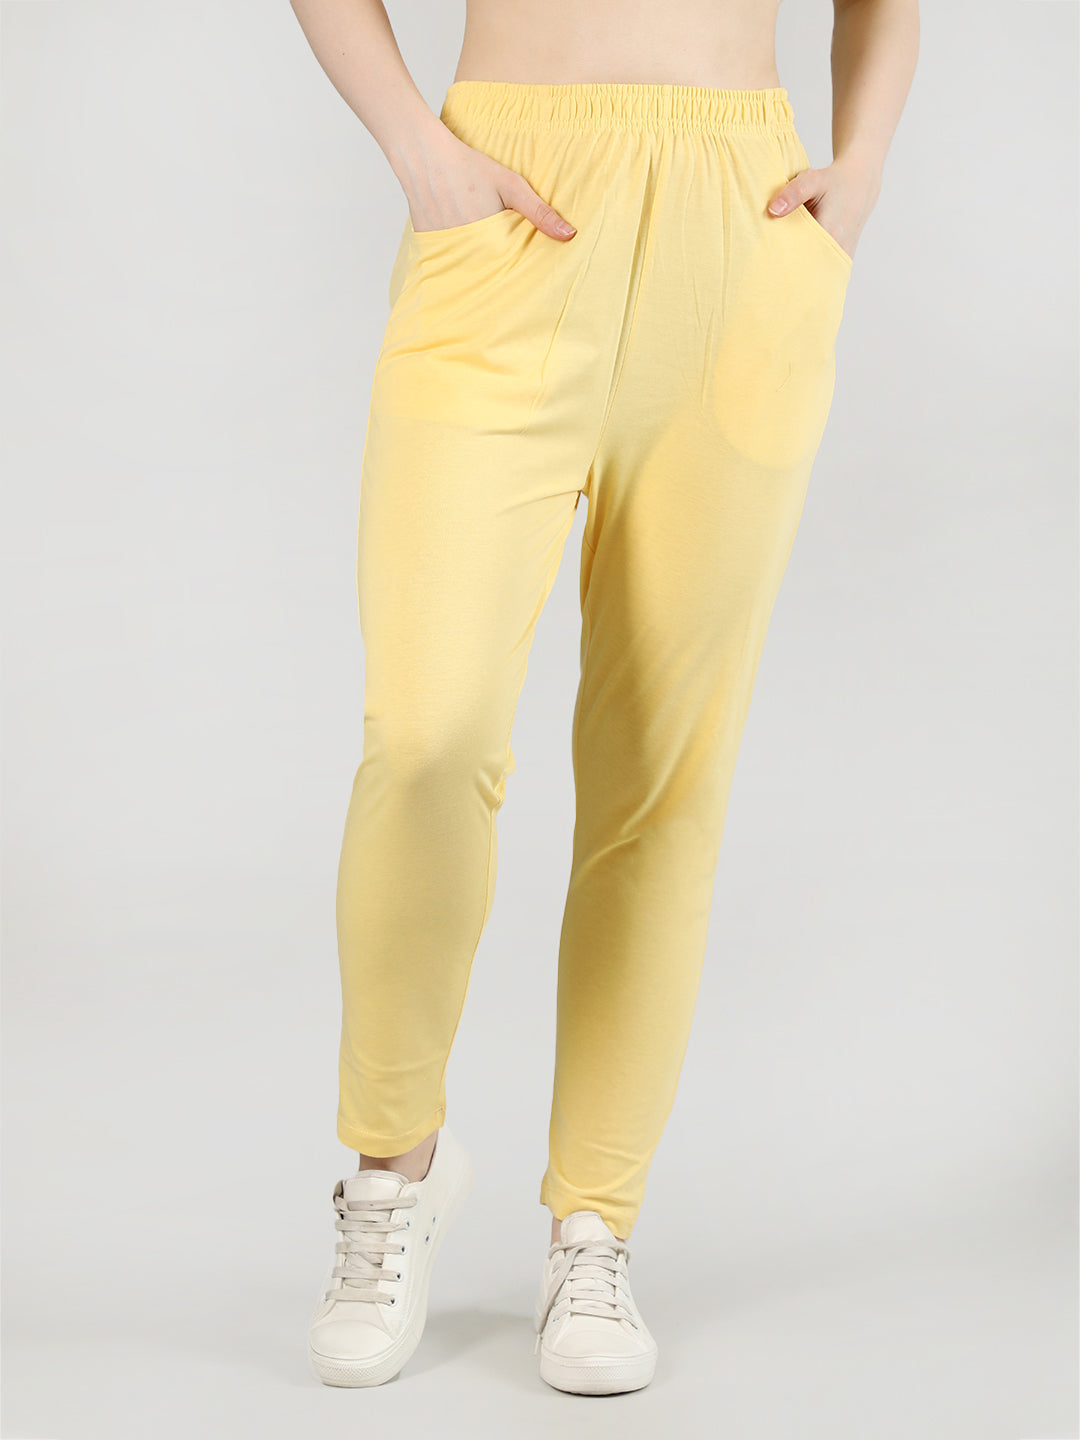 Solid Colors Ladies Cotton Pant, Waist Size: 28.0 at Rs 390/piece in  Ludhiana